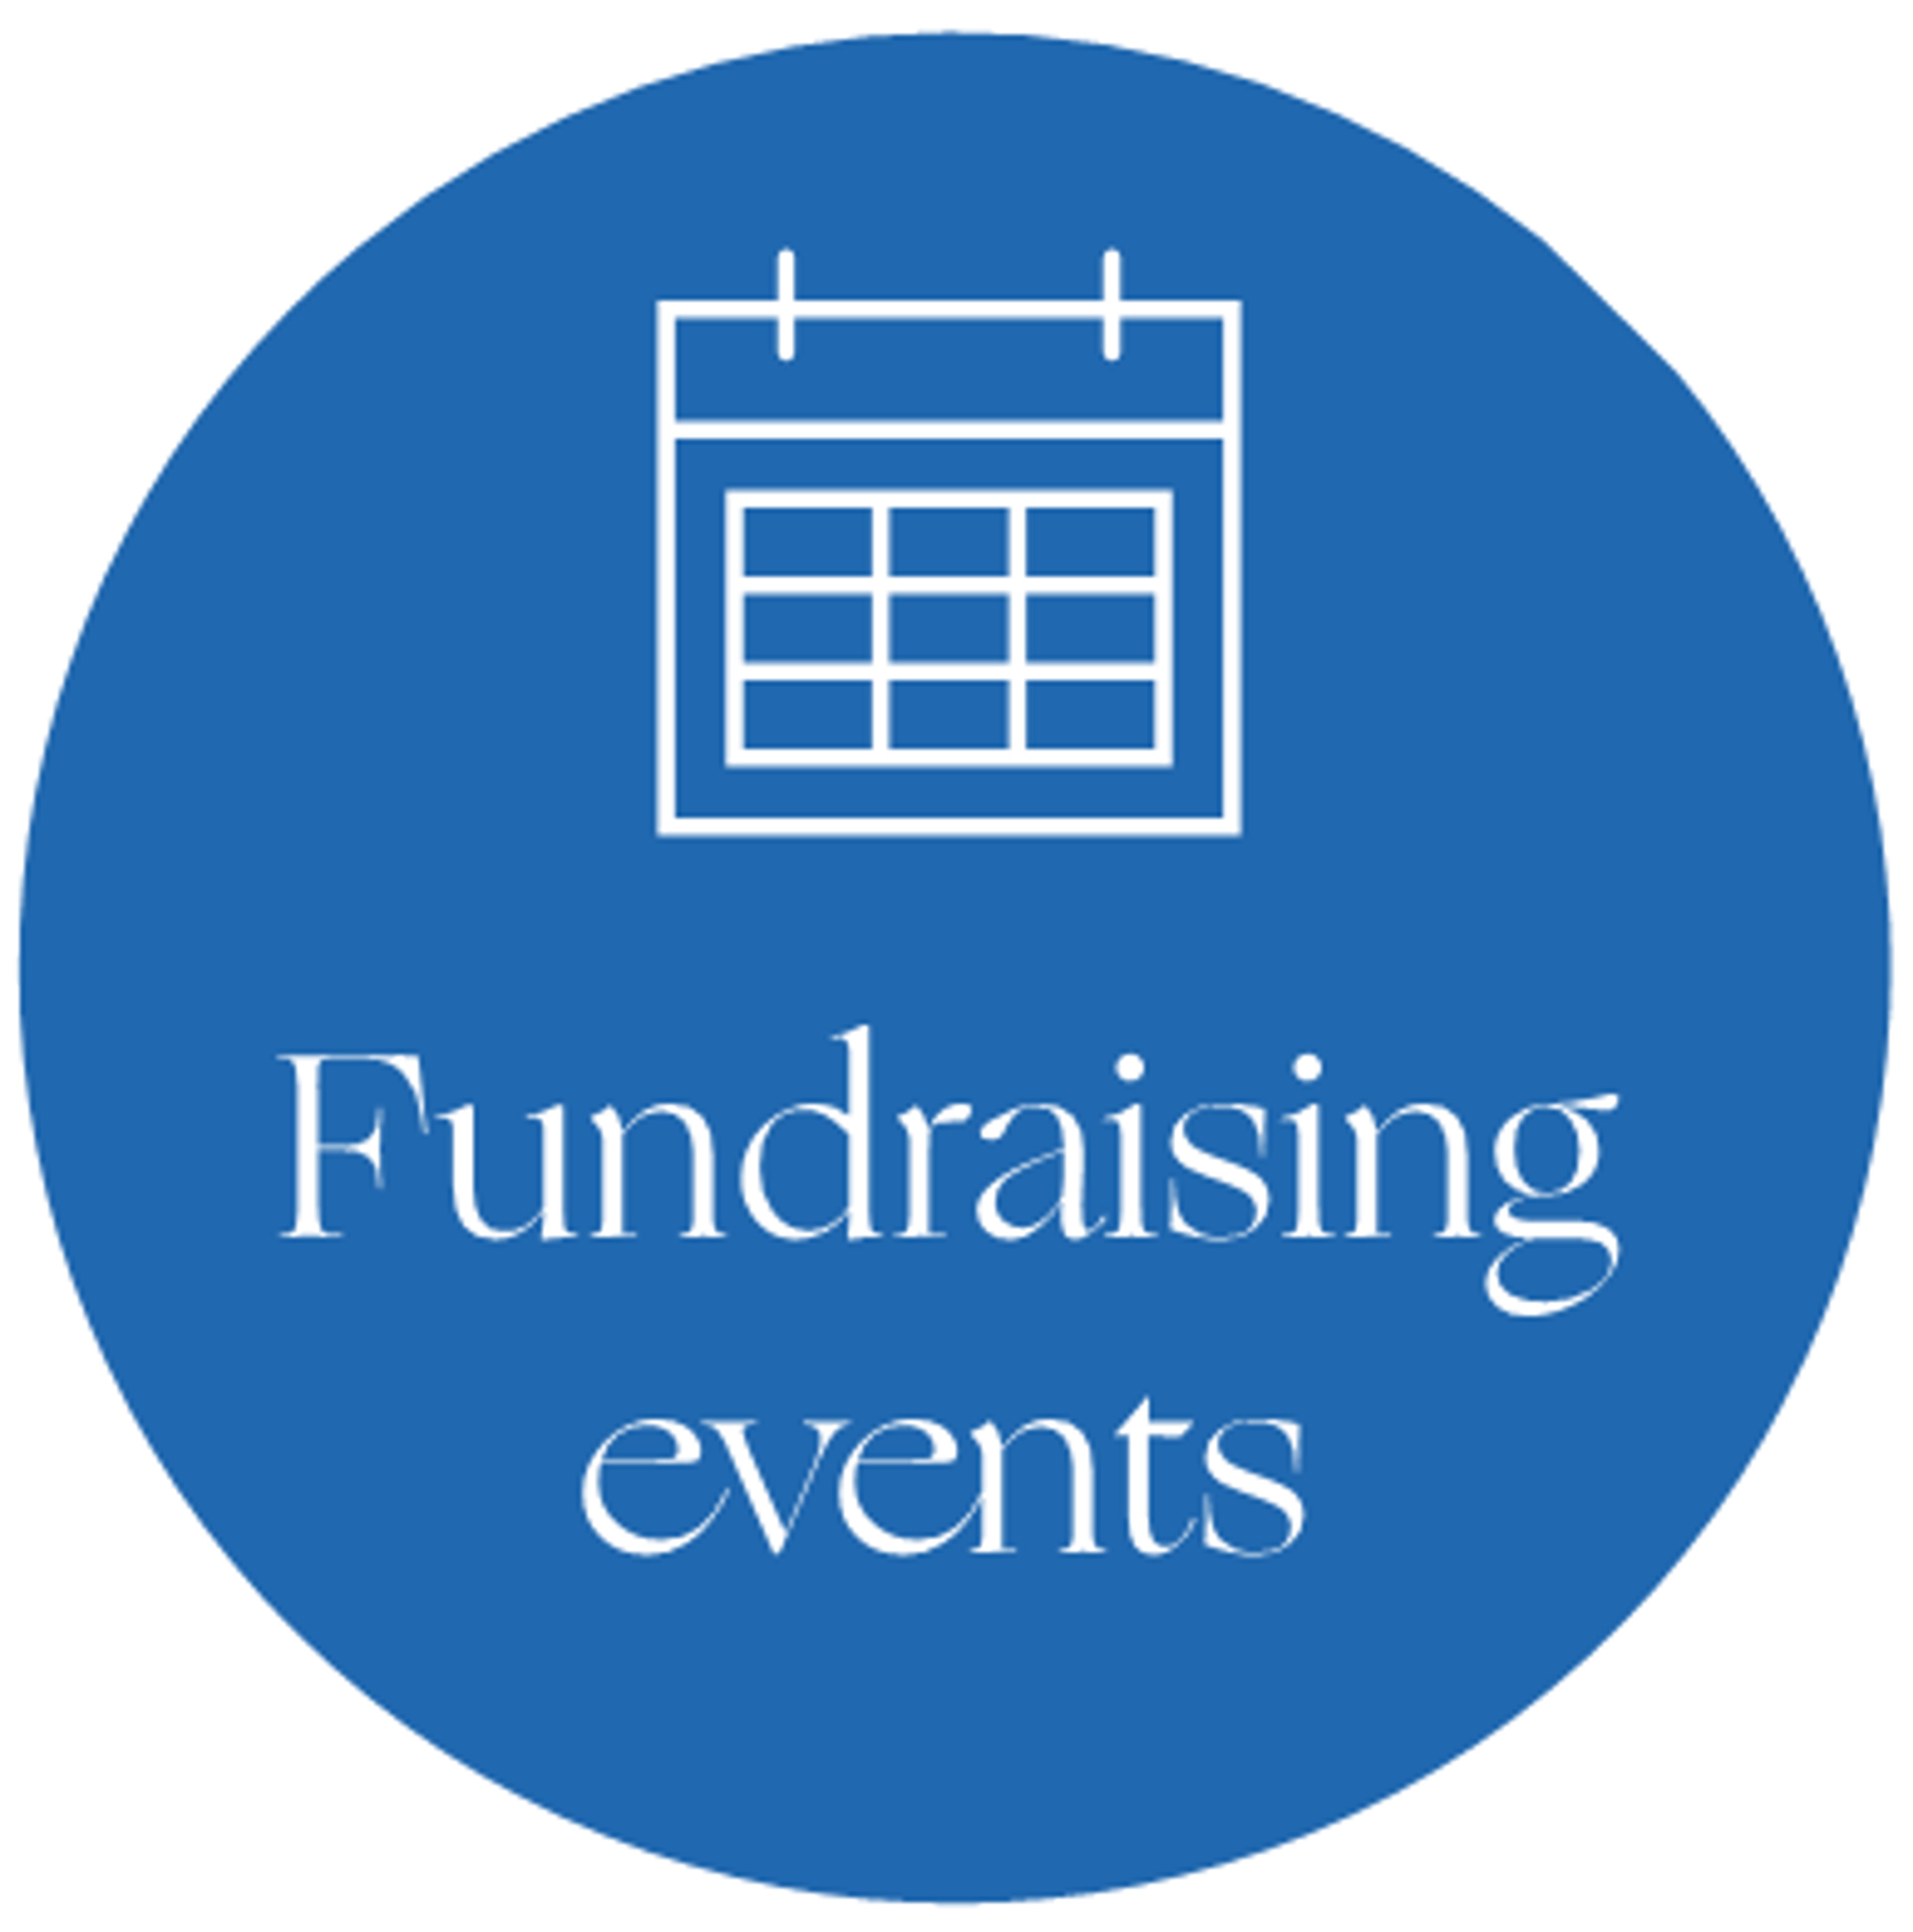 Fundraising events icon